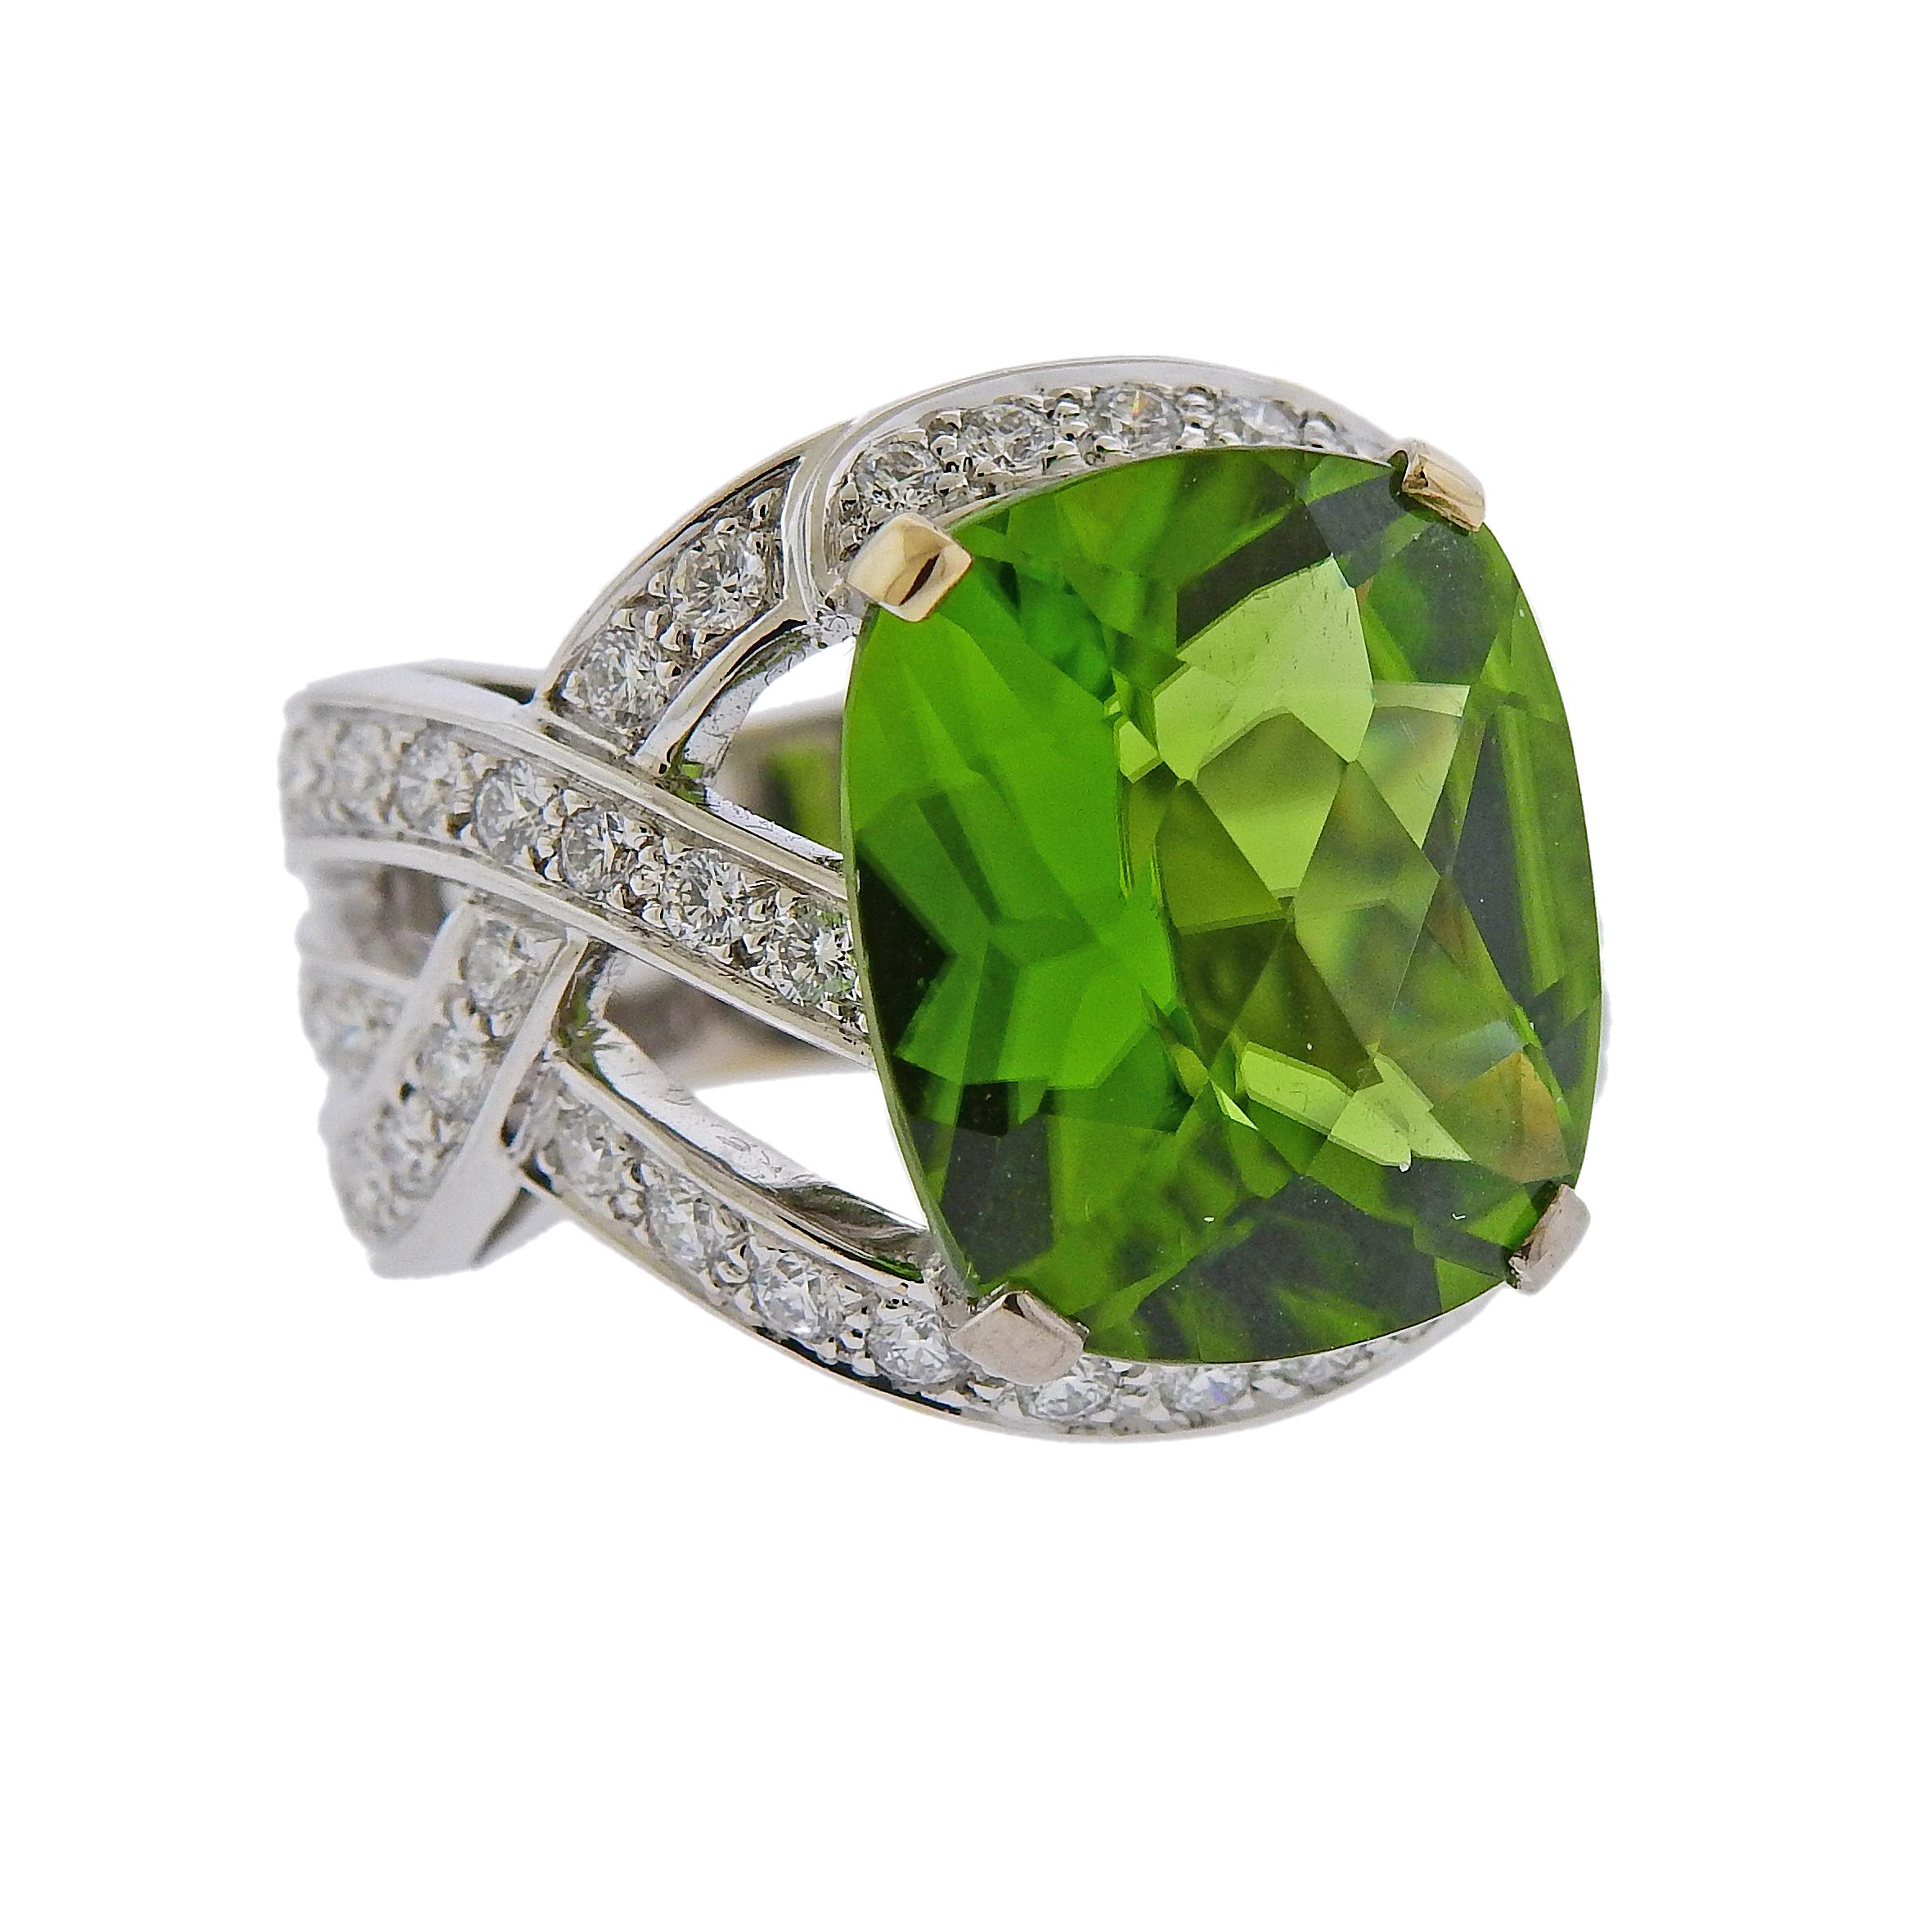 Lage 18k white gold cocktail ring by Boucheron, set with an approx. 12.90 carat peridot, surrounded with approx. 1.10ctw in G/VS diamonds.  Ring size - 6.5, ring top is measured 19mm wide. Weight is 16.8 grams. Marked: or750,53, E36698, Boucheron,